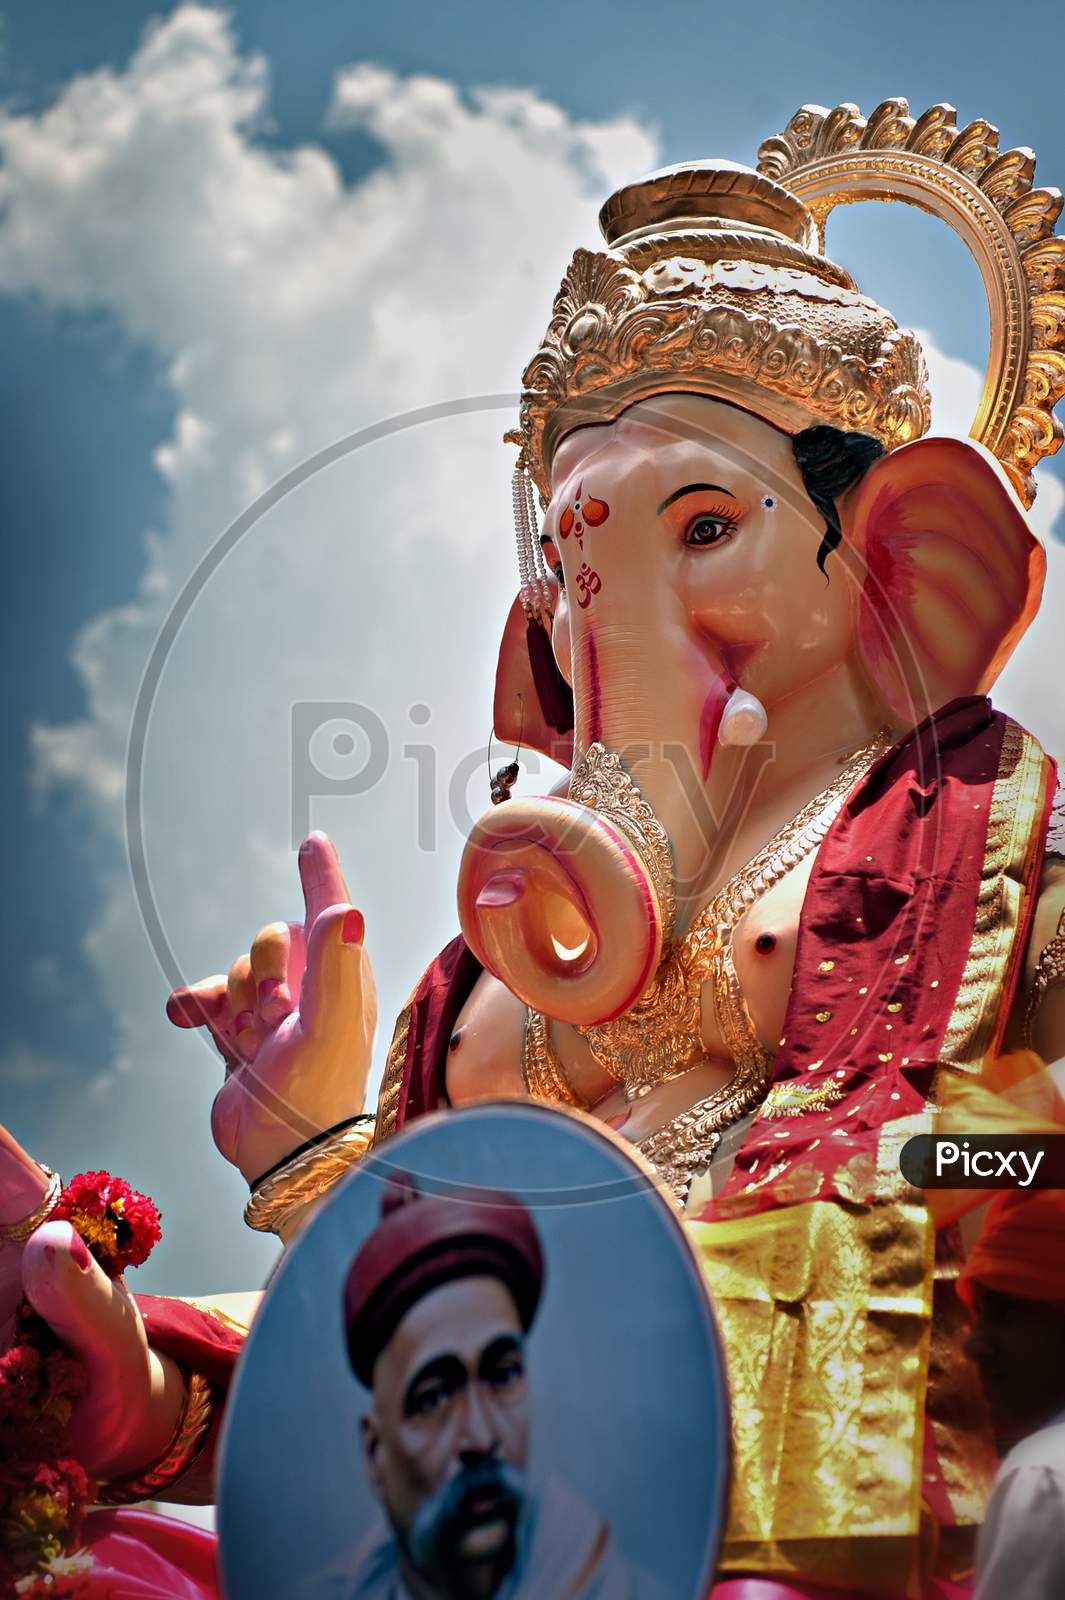 Lord Ganesh photo ,in this photo there is also picture of Lokmanya Tilak who initiated and started Ganesh festival in india